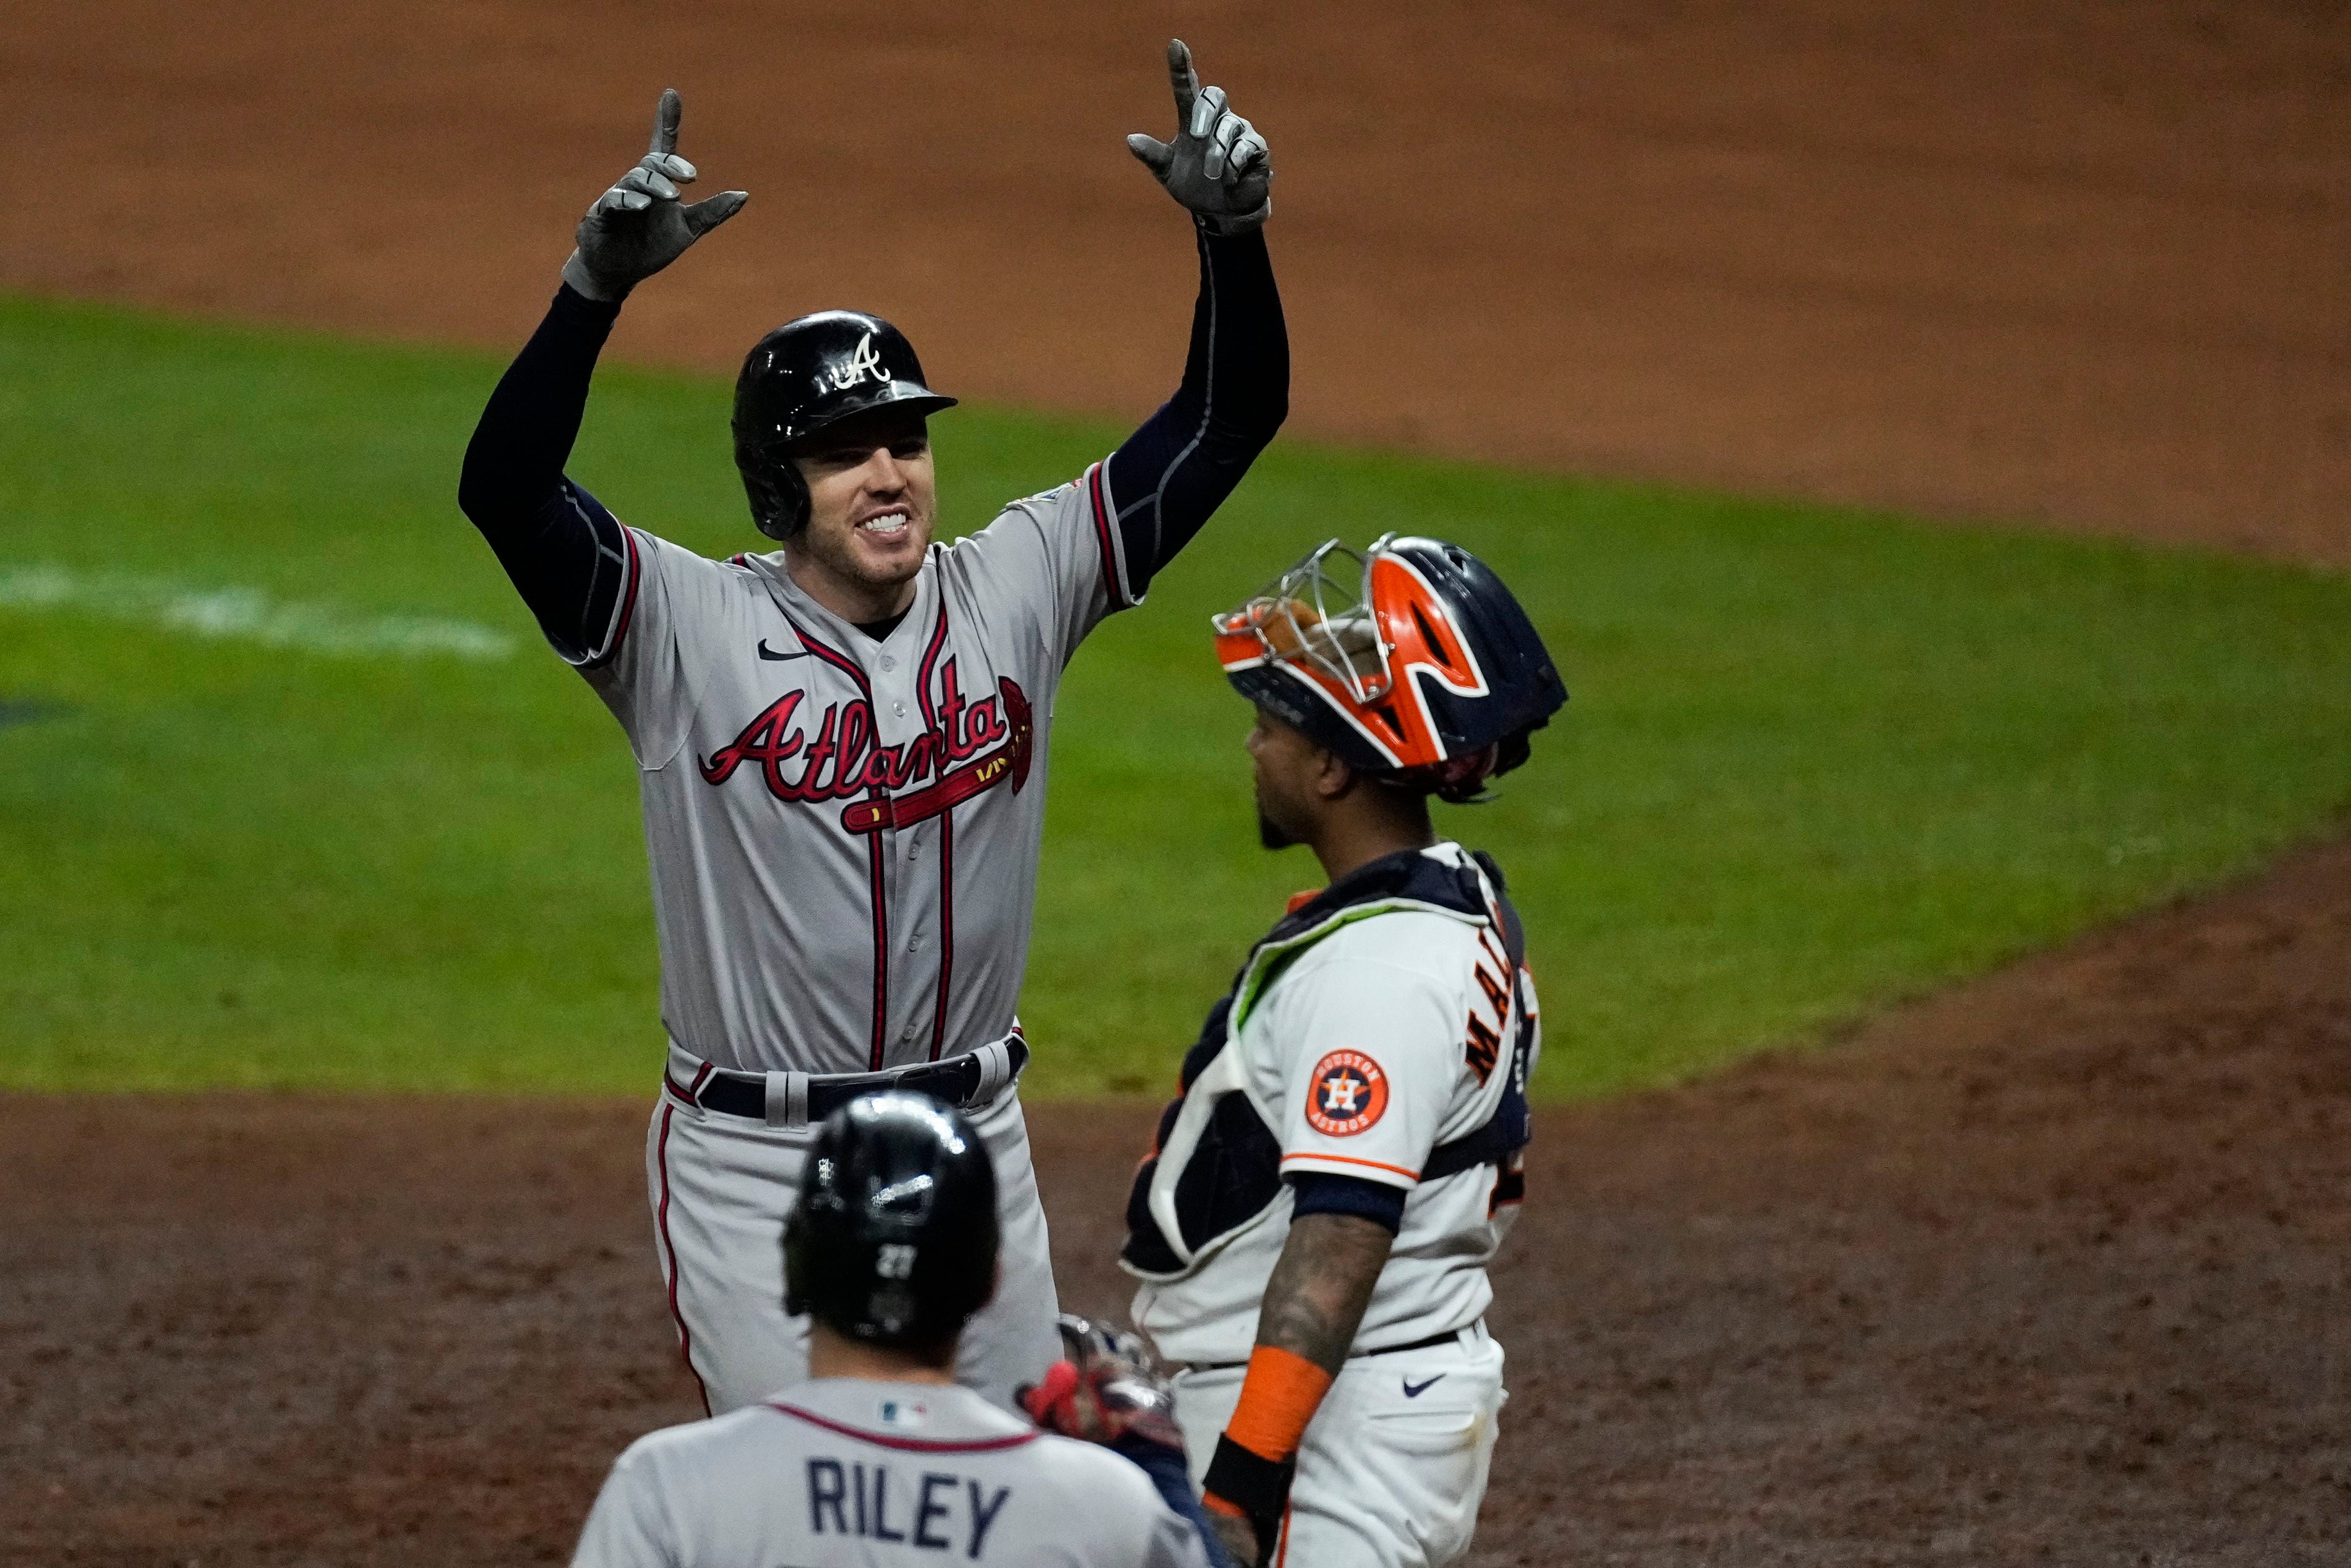 The Latest: Braves win first World Series title since 1995